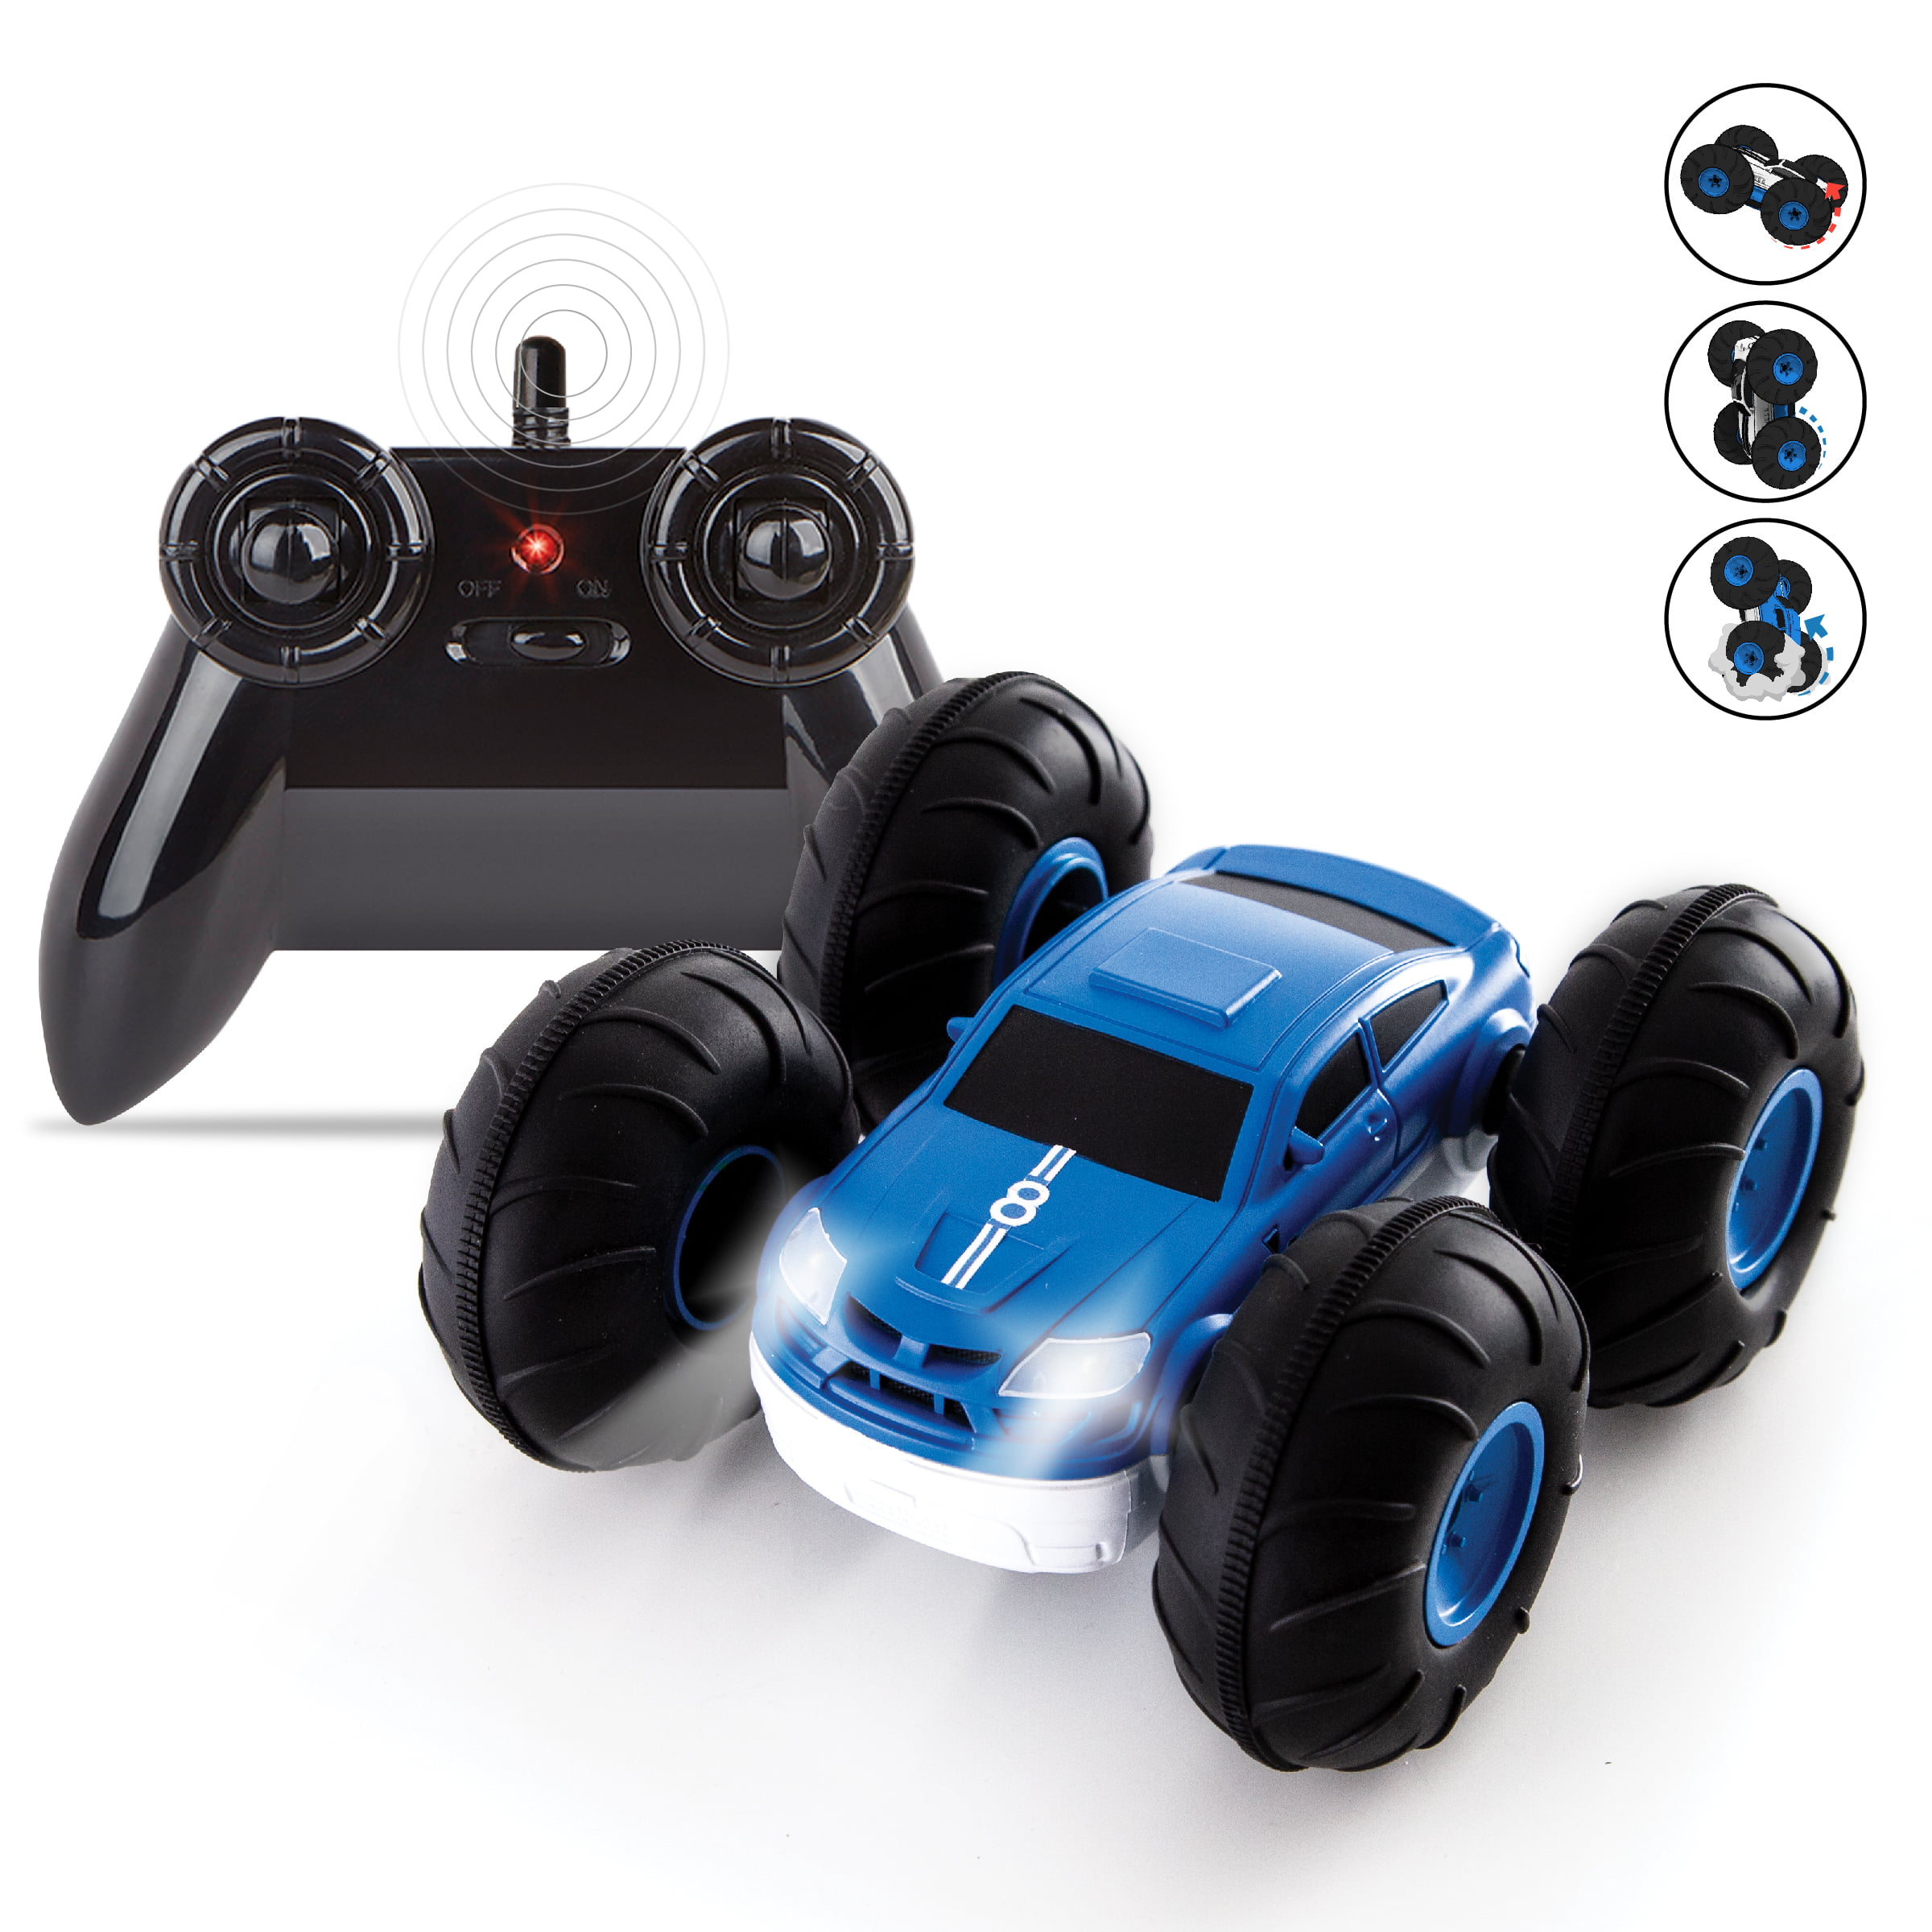 1/14 2.4Ghz Radio Controlled Truck Electric Tractor Engineering RC Car InKach Remote Control Excavators for Boys Alloy Grab Wood Excavator Loader Toys